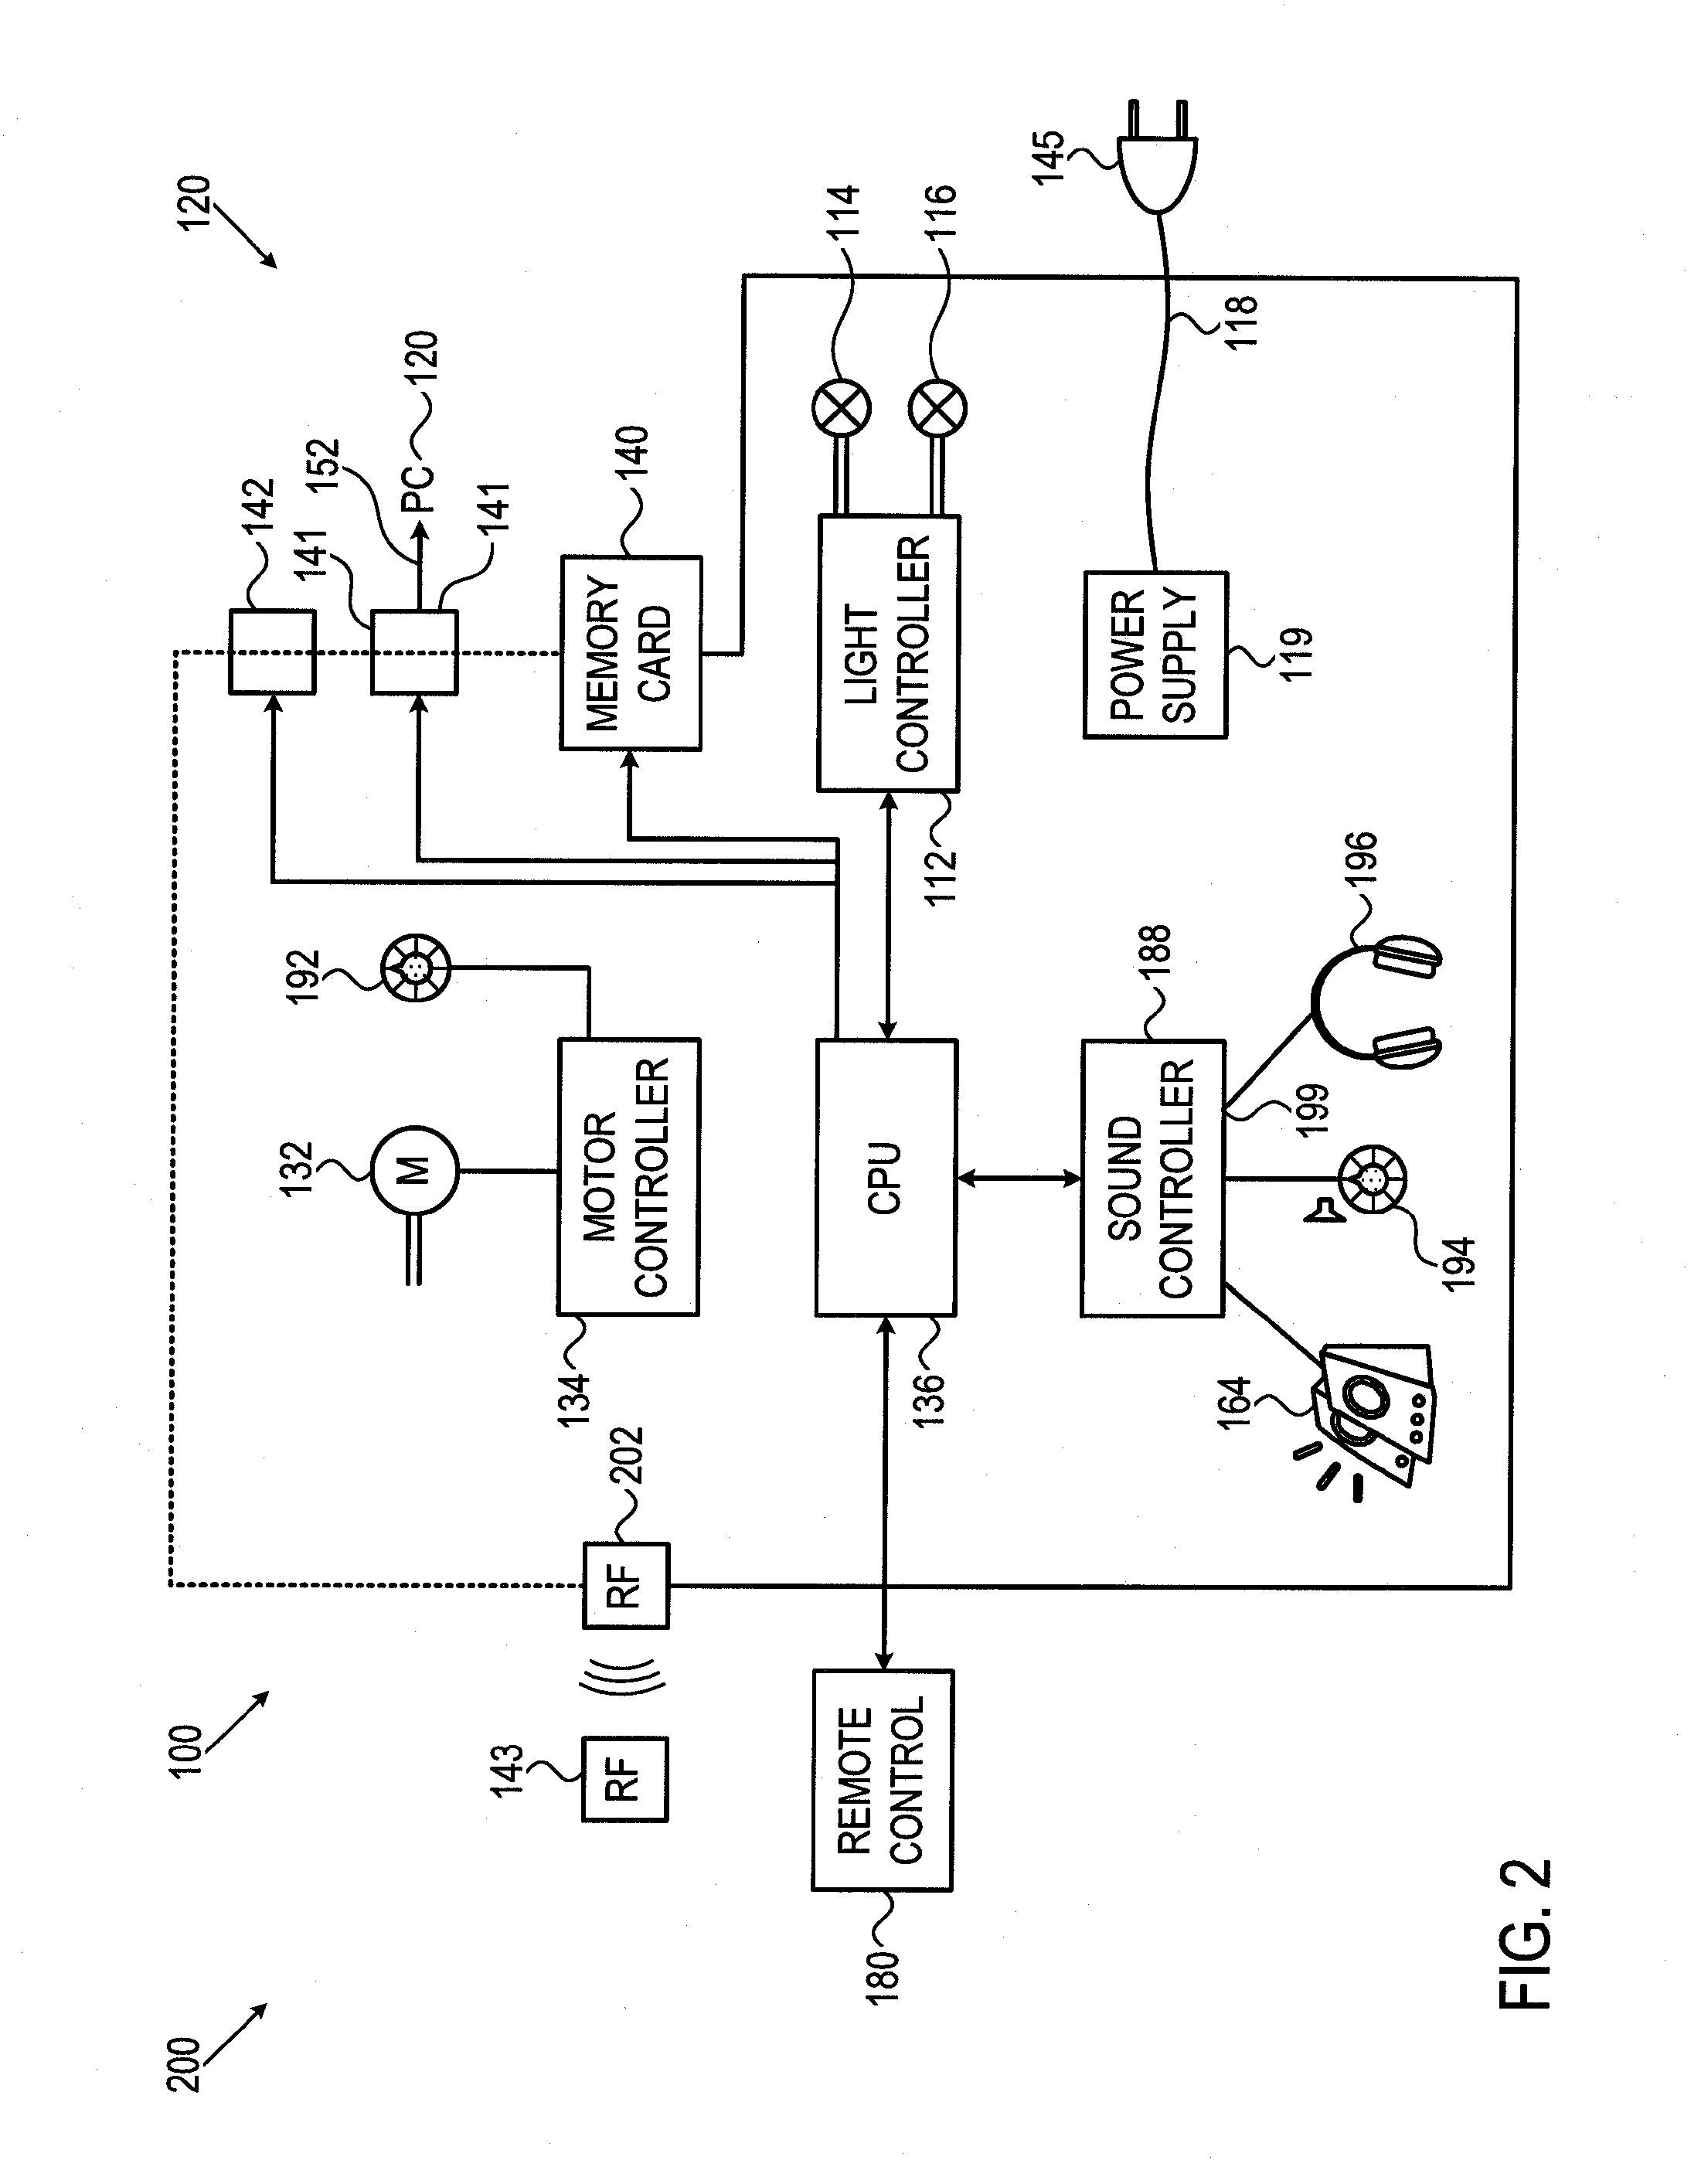 Audio-feedback computerized system and method for operator-controlled eye exercise